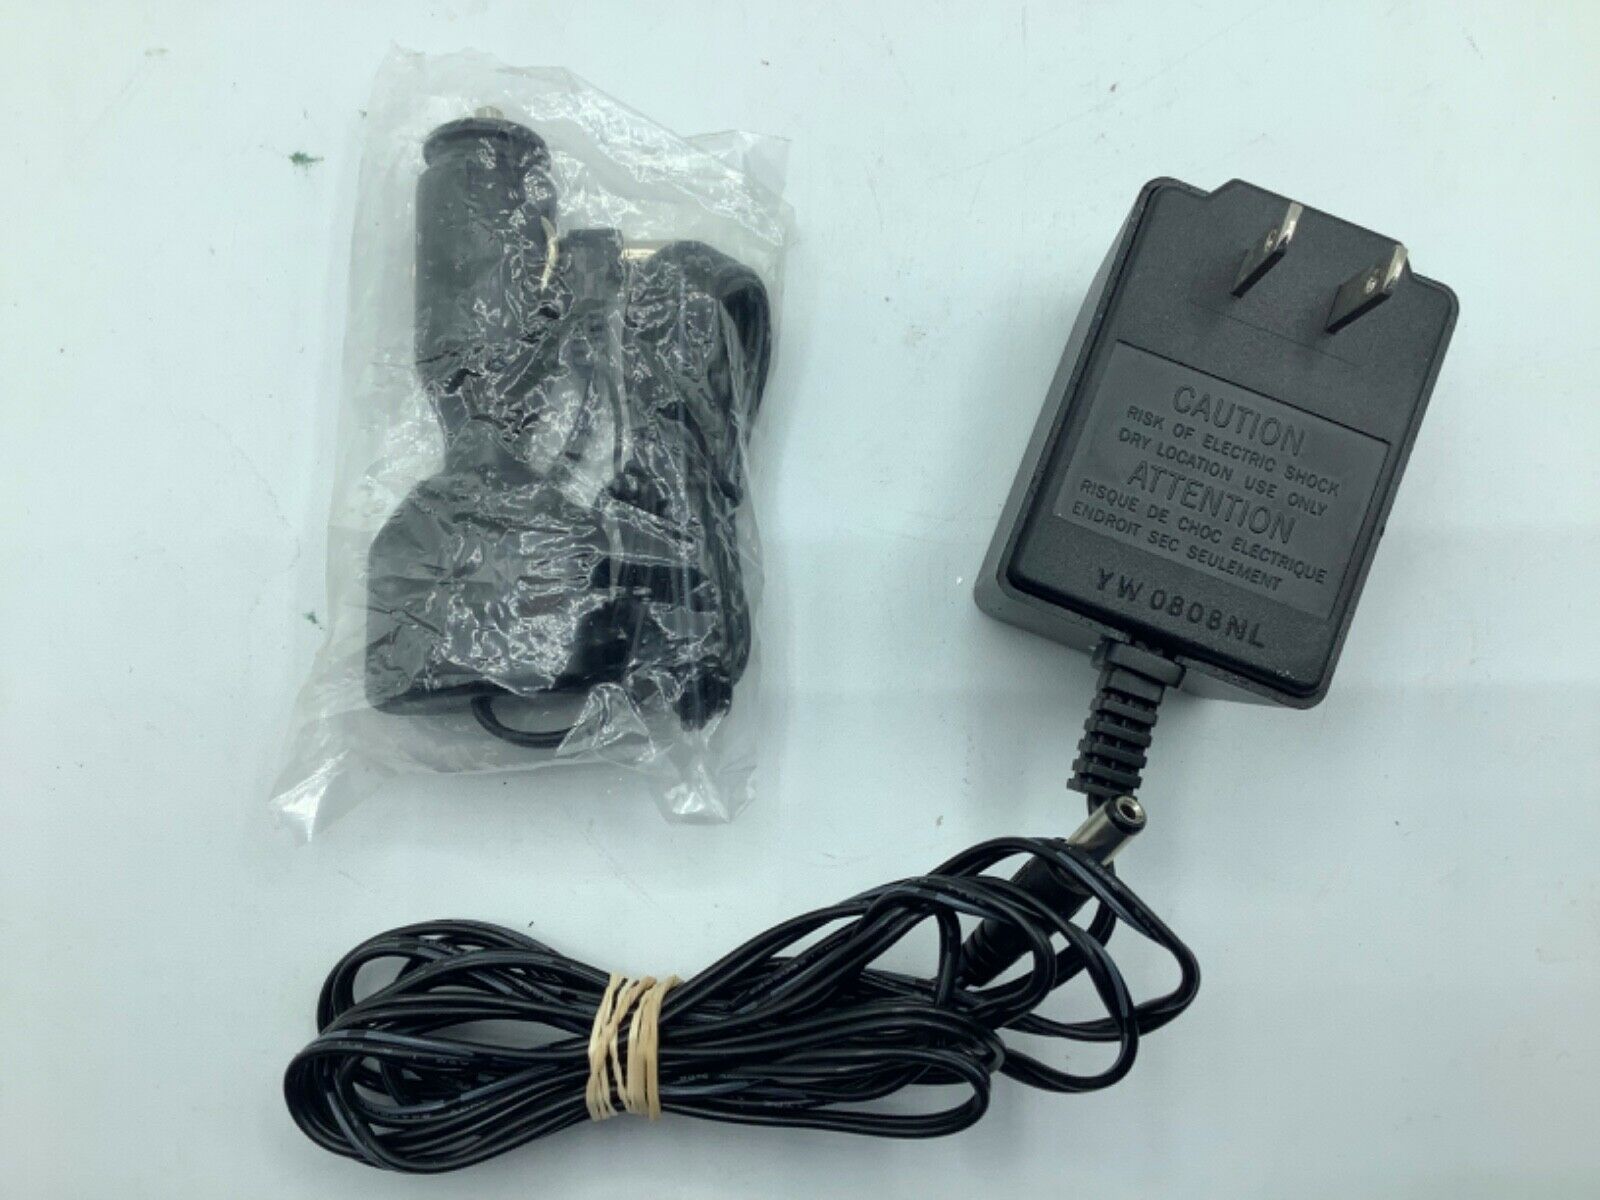 AC Adapter Charger For Coleman 5327A750 Rugged Lantern Switching Power Supply Type: AC/DC Adapter MPN: Does not appl - Click Image to Close